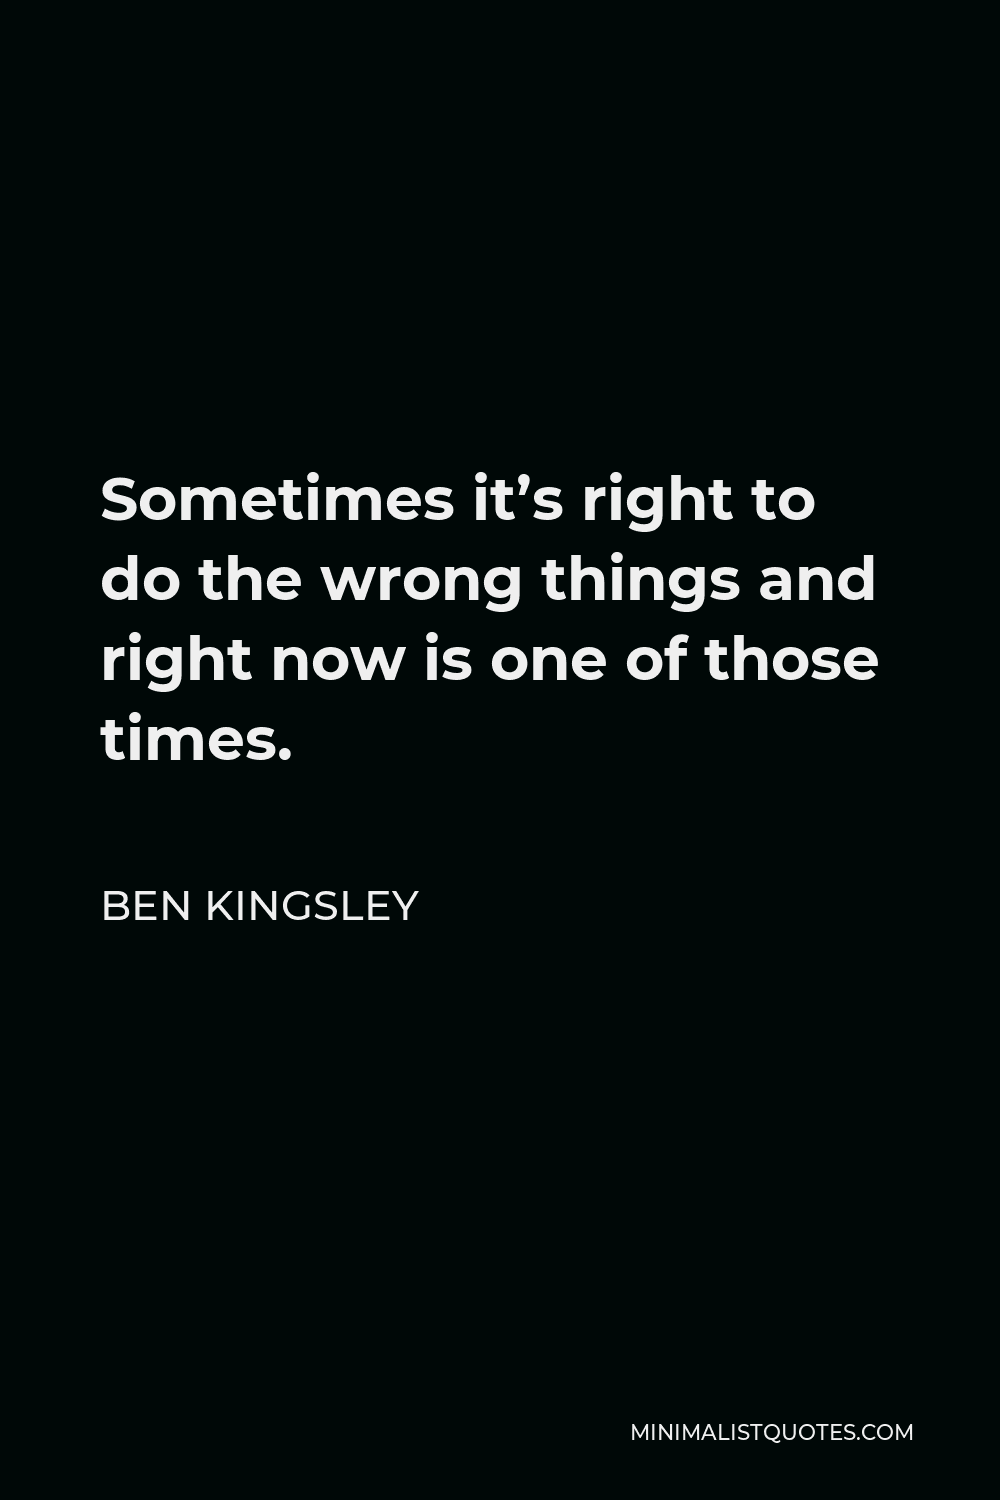 Ben Kingsley Quote - Sometimes it’s right to do the wrong things and right now is one of those times.